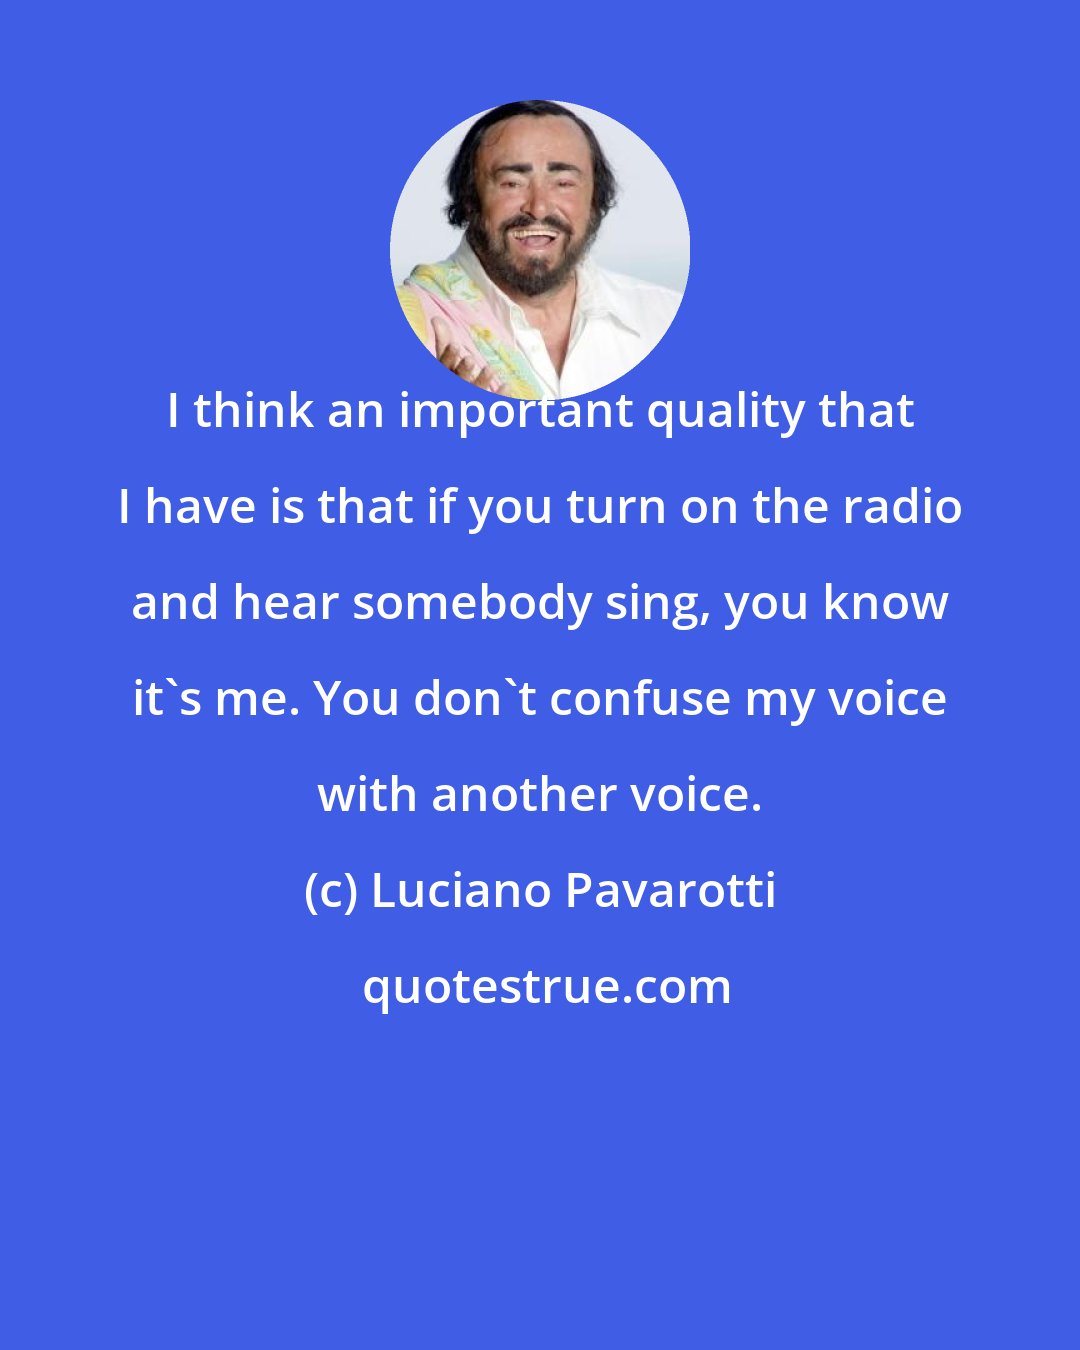 Luciano Pavarotti: I think an important quality that I have is that if you turn on the radio and hear somebody sing, you know it's me. You don't confuse my voice with another voice.